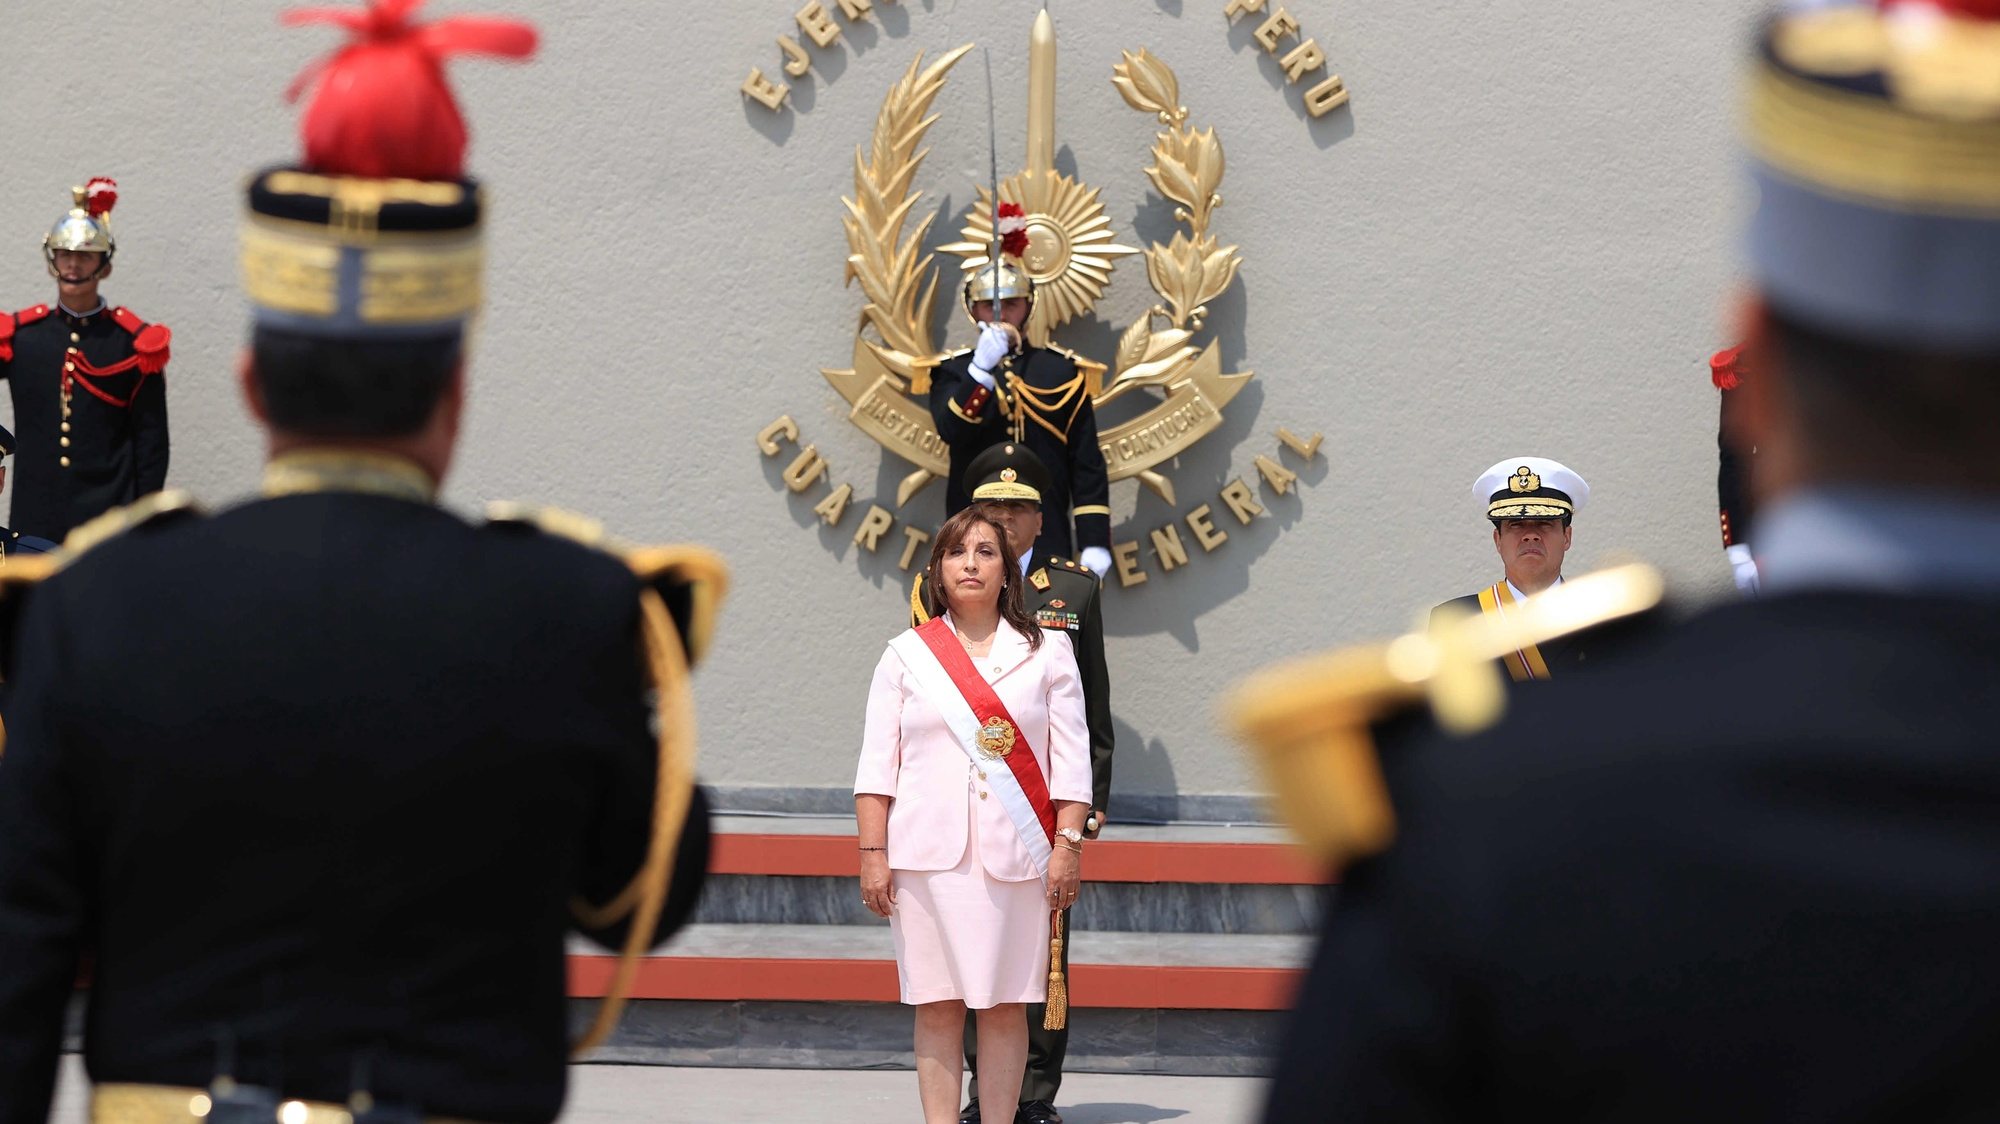 epa10357847 A handout photo made available by the Peruvian Presidency shows the President of Peru Dina Boluarte (C) attends a ceremony commemorating the Battle of Ayacucho on Army Day in Lima, Peru, 09 December 2022. Boluarte led the ceremony at the Army headquarters in Lima and offered her respects to those who fell in that battle, crucial for the independence of Peru.  EPA/PRESIDENCY OF PERU HANDOUT MANDATORY CREDIT HANDOUT EDITORIAL USE ONLY/NO SALES